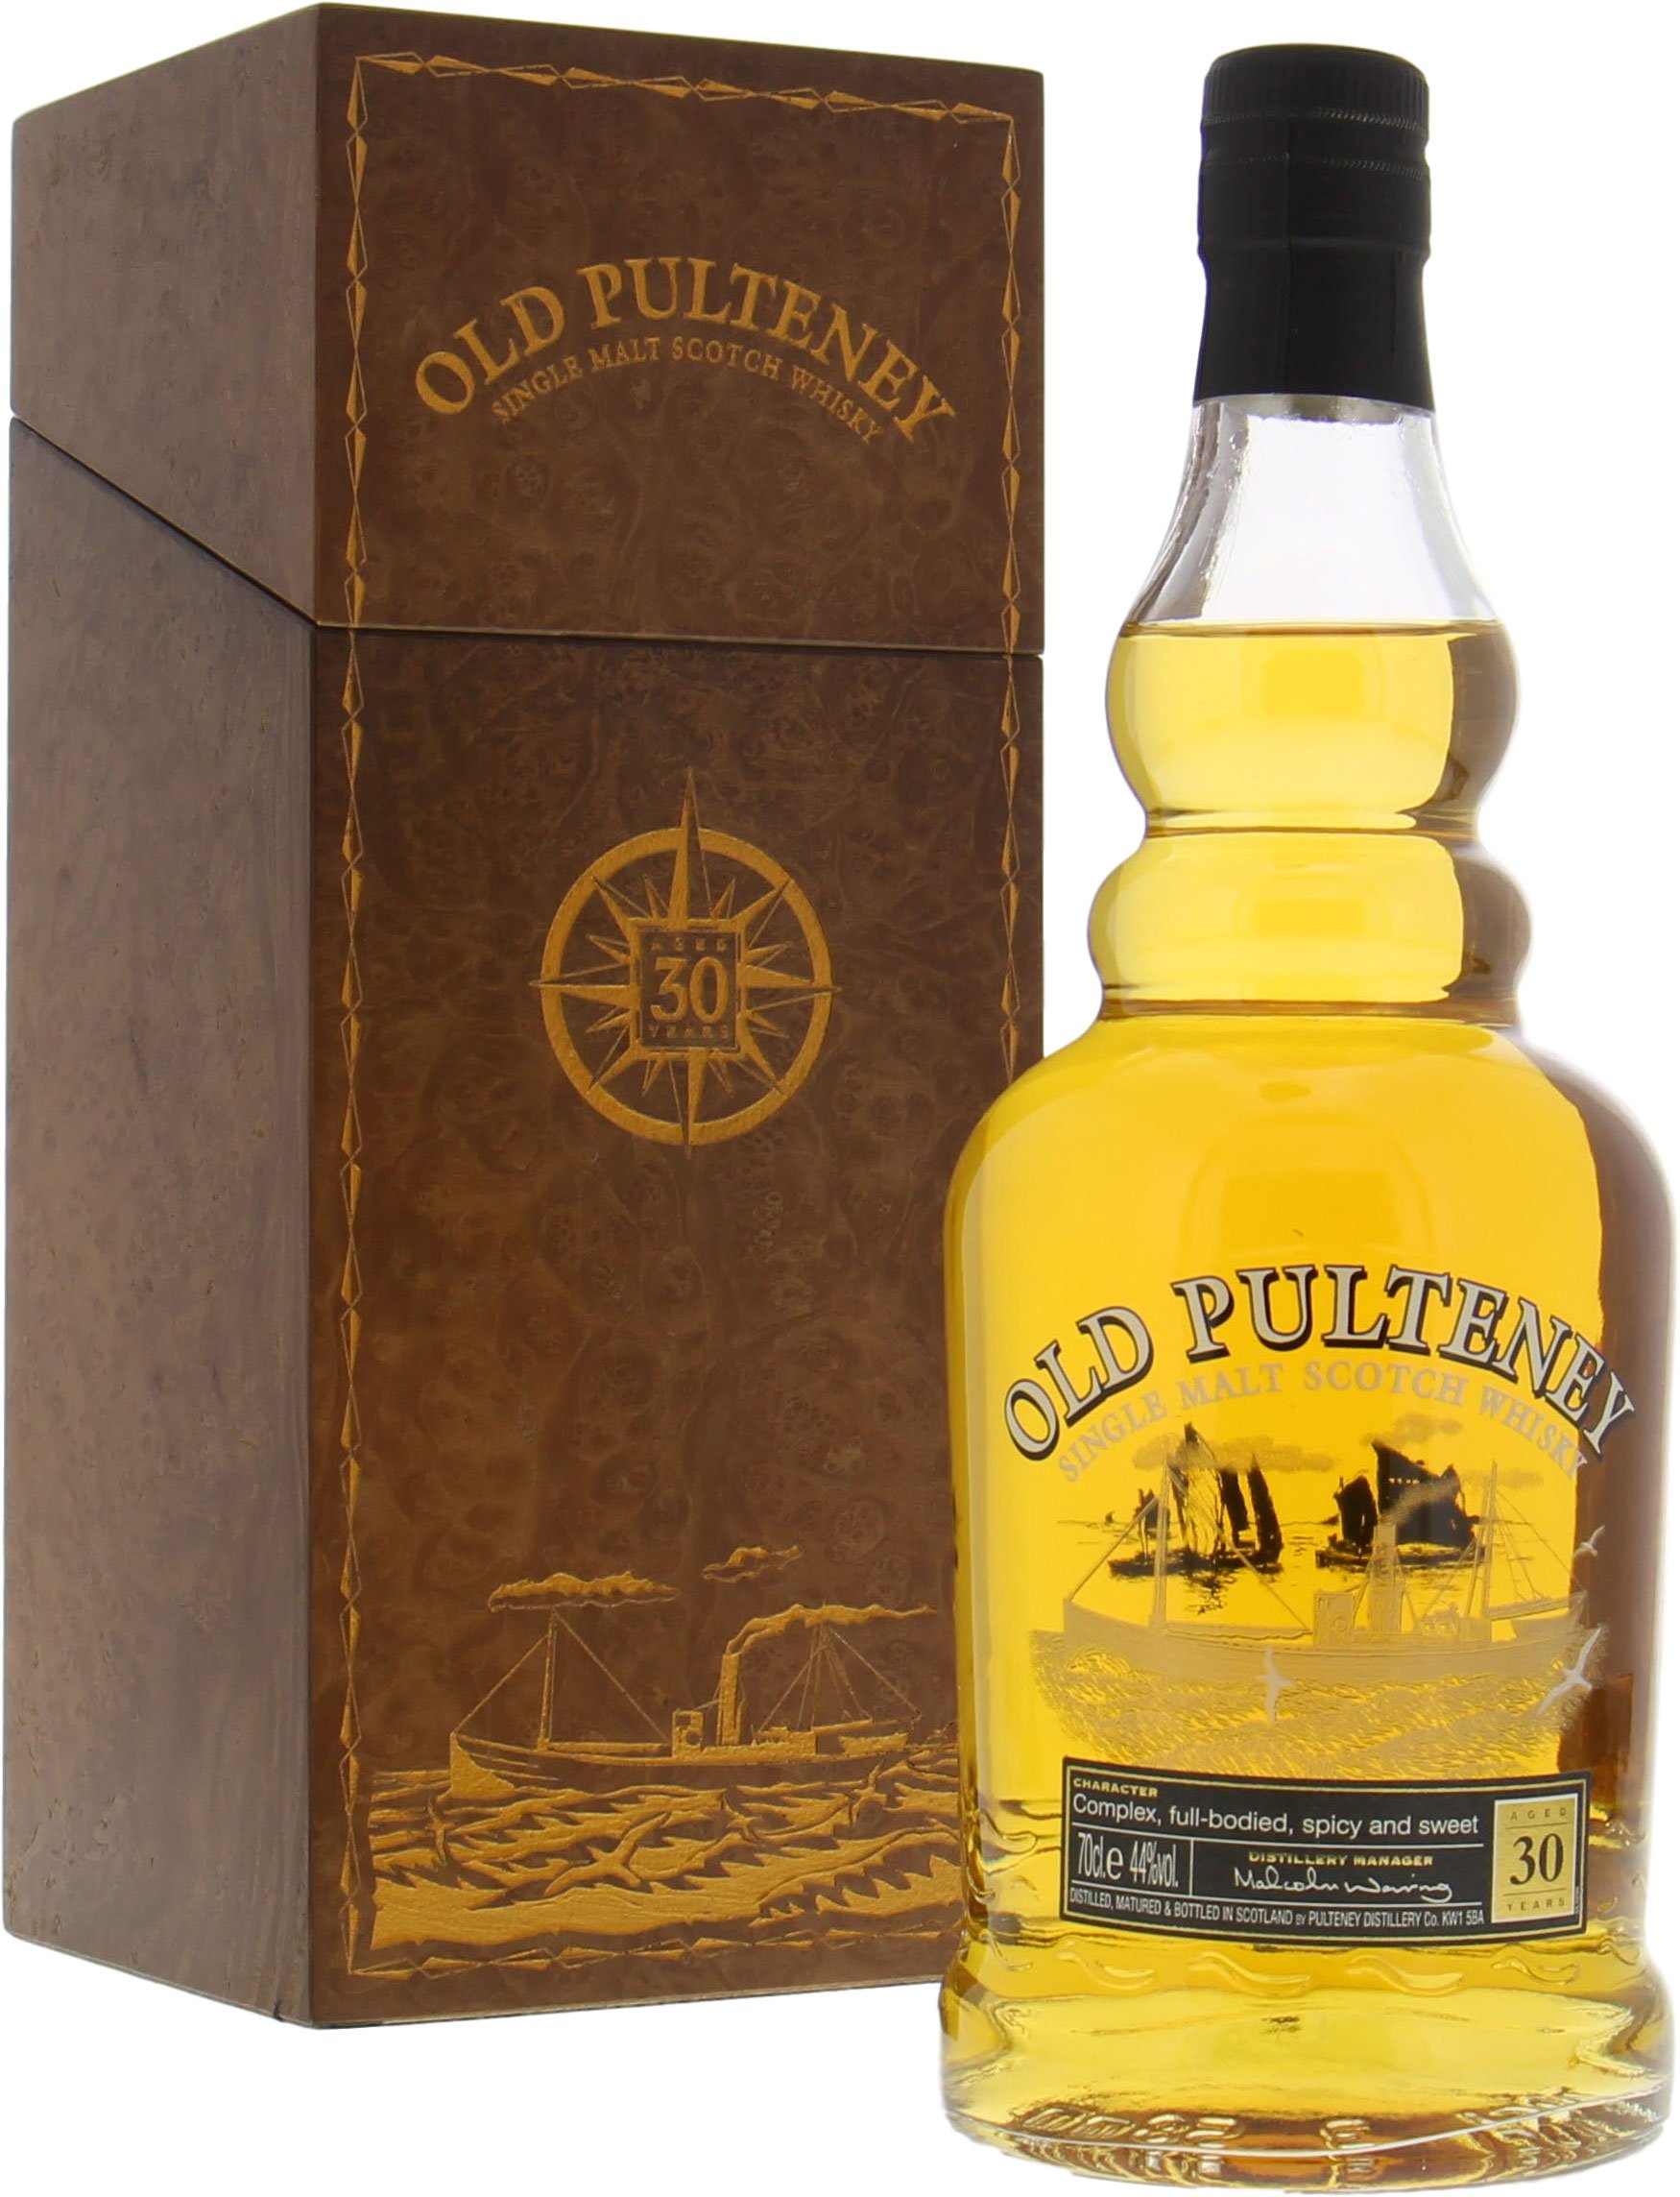 Old Pulteney - 30 Years Old 44% NV In Original Wooden container